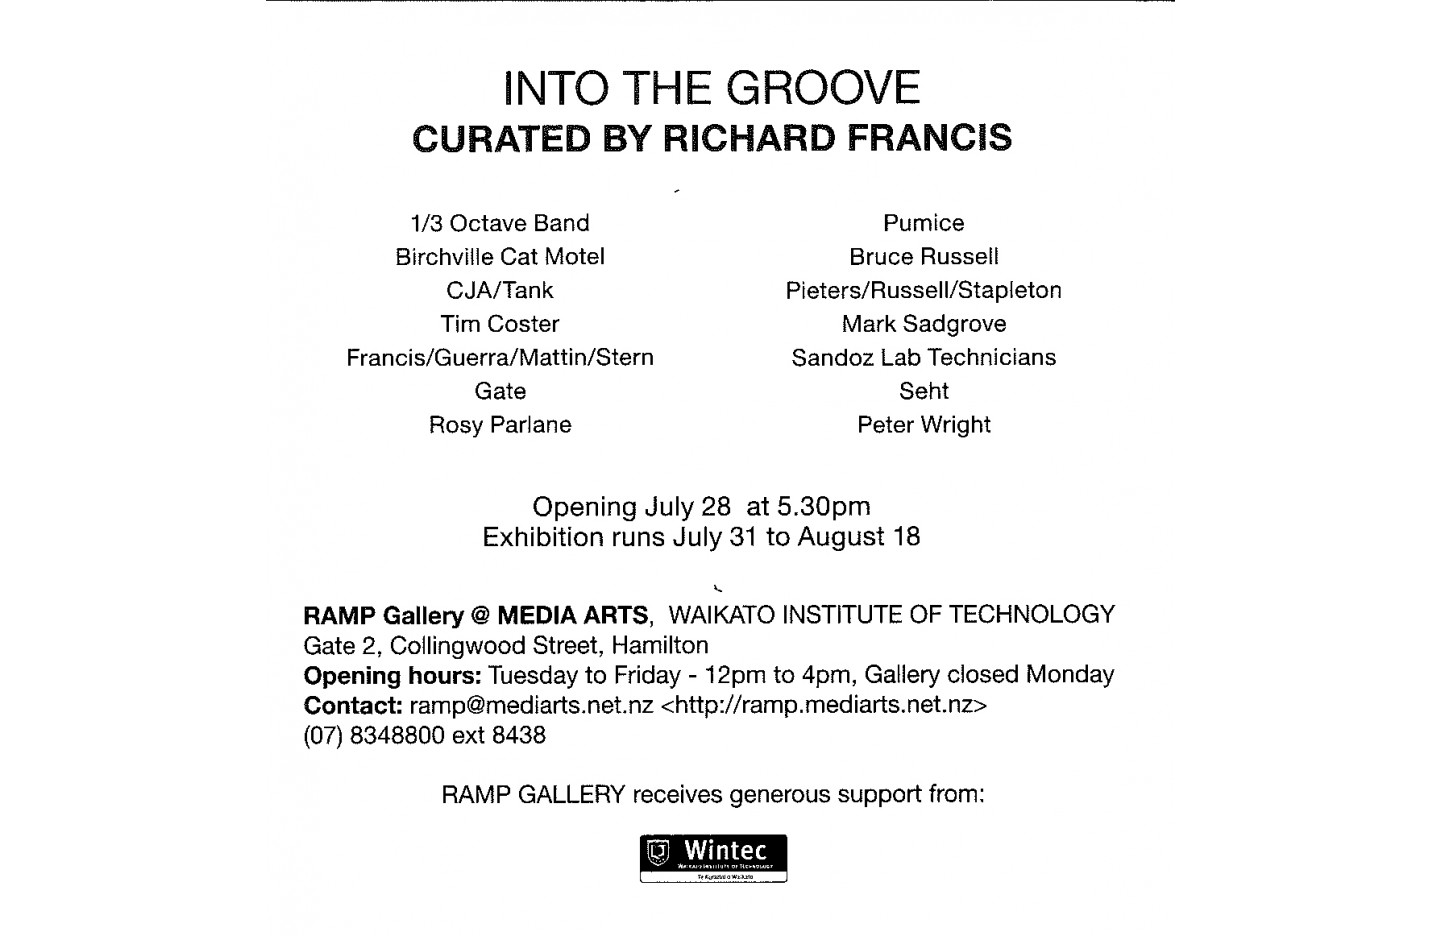 Into the Groove, Ramp Gallery (2006)